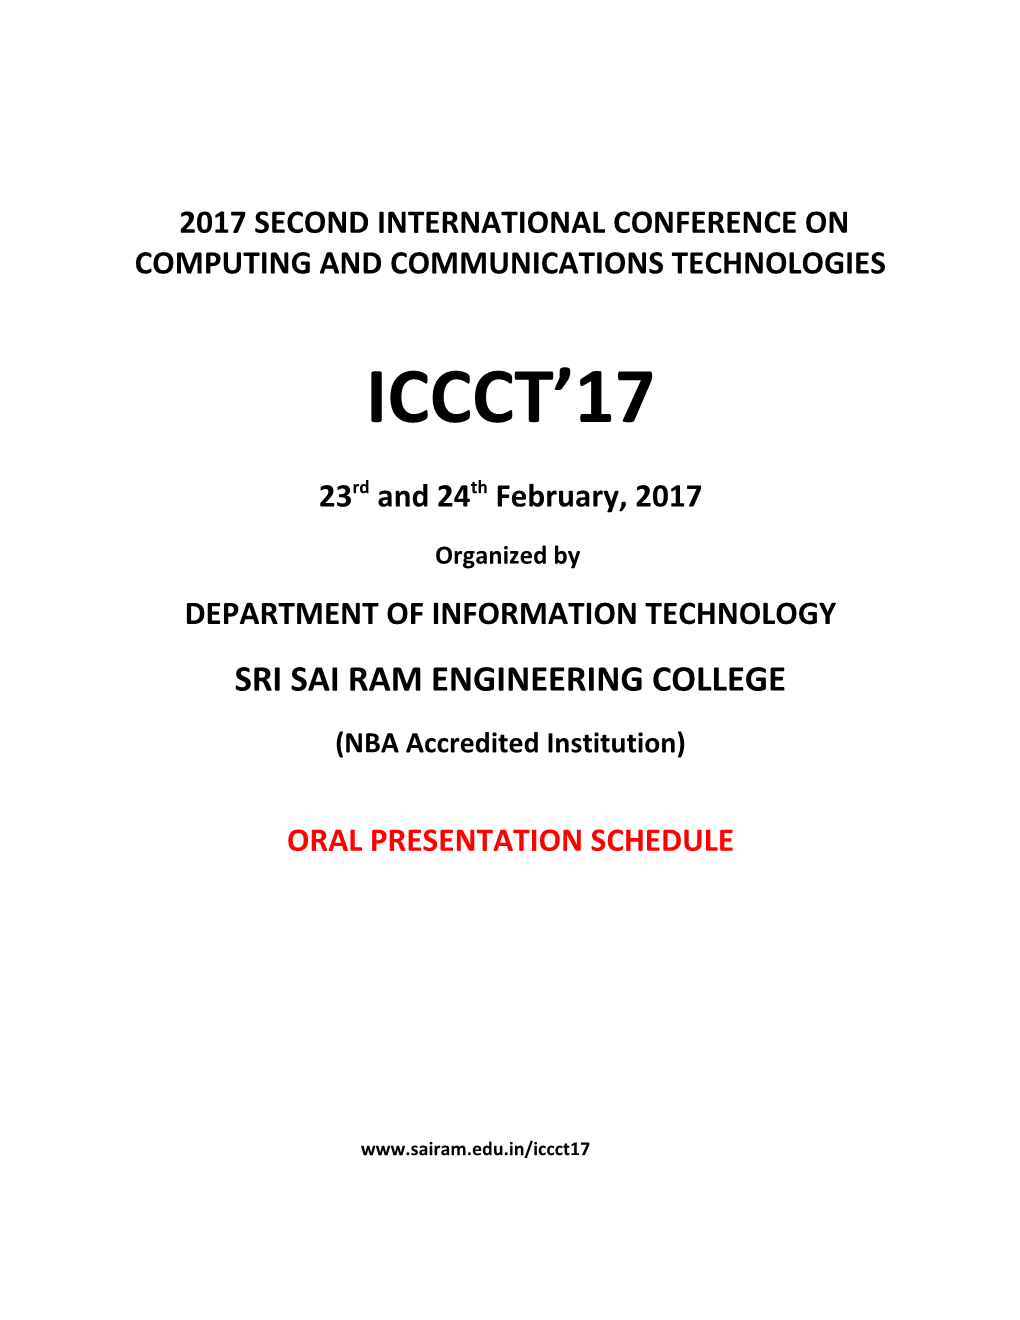 2017 Second International Conference on Computing and Communicationstechnologies